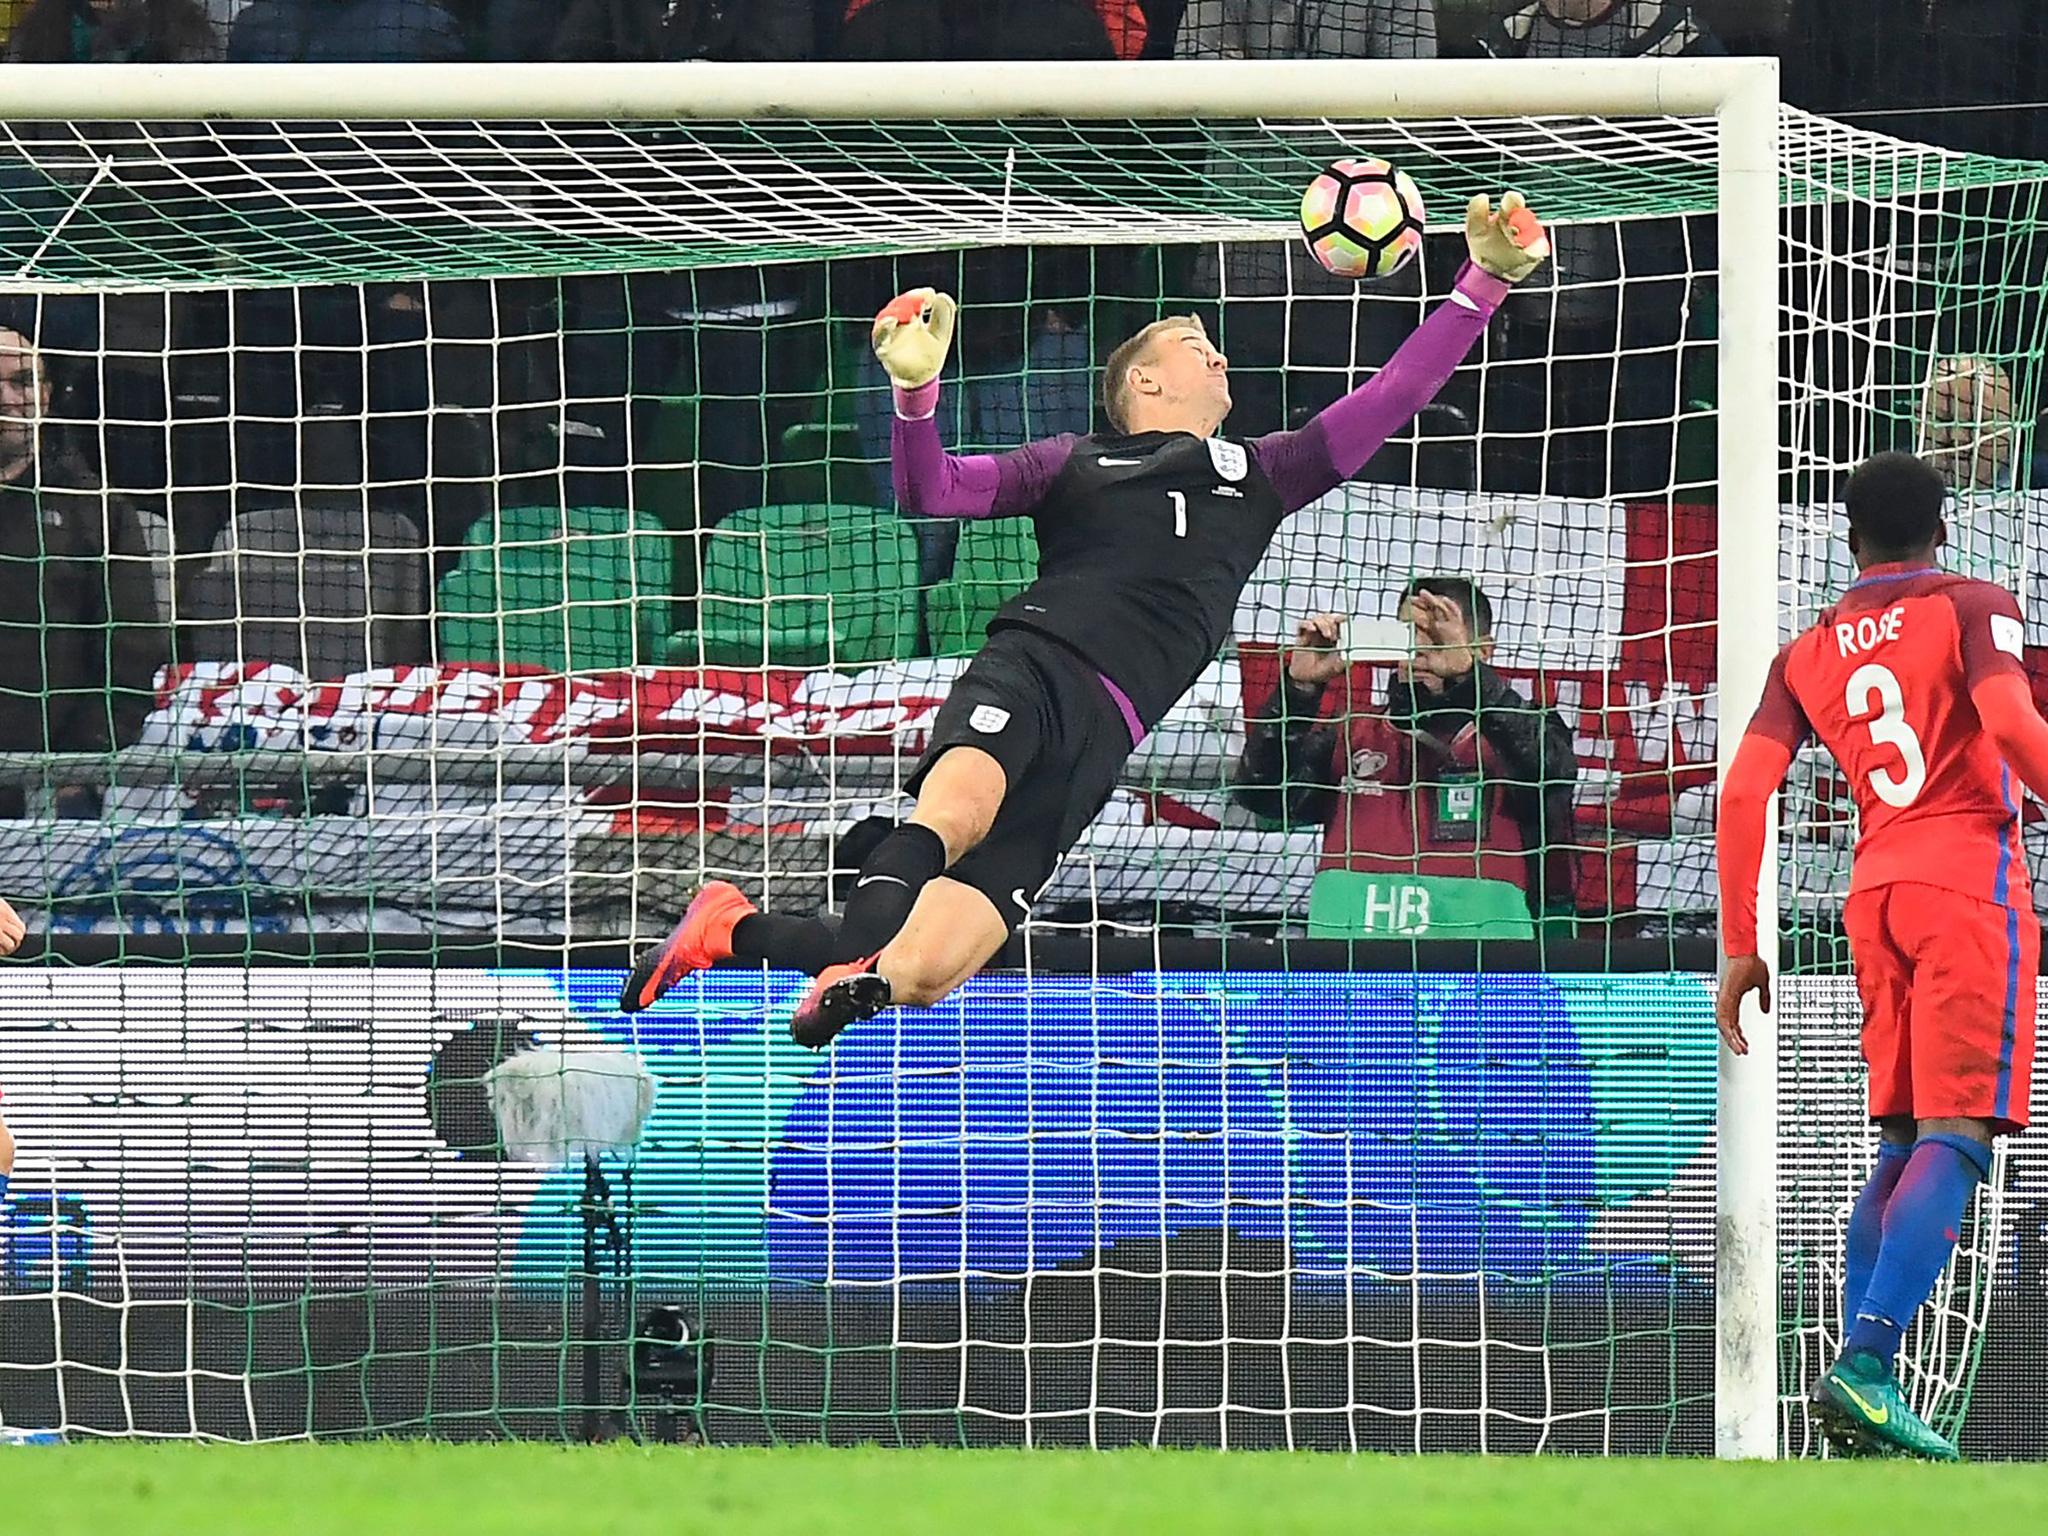 Hart made an excellent double-save to deny Kurtic from a corner